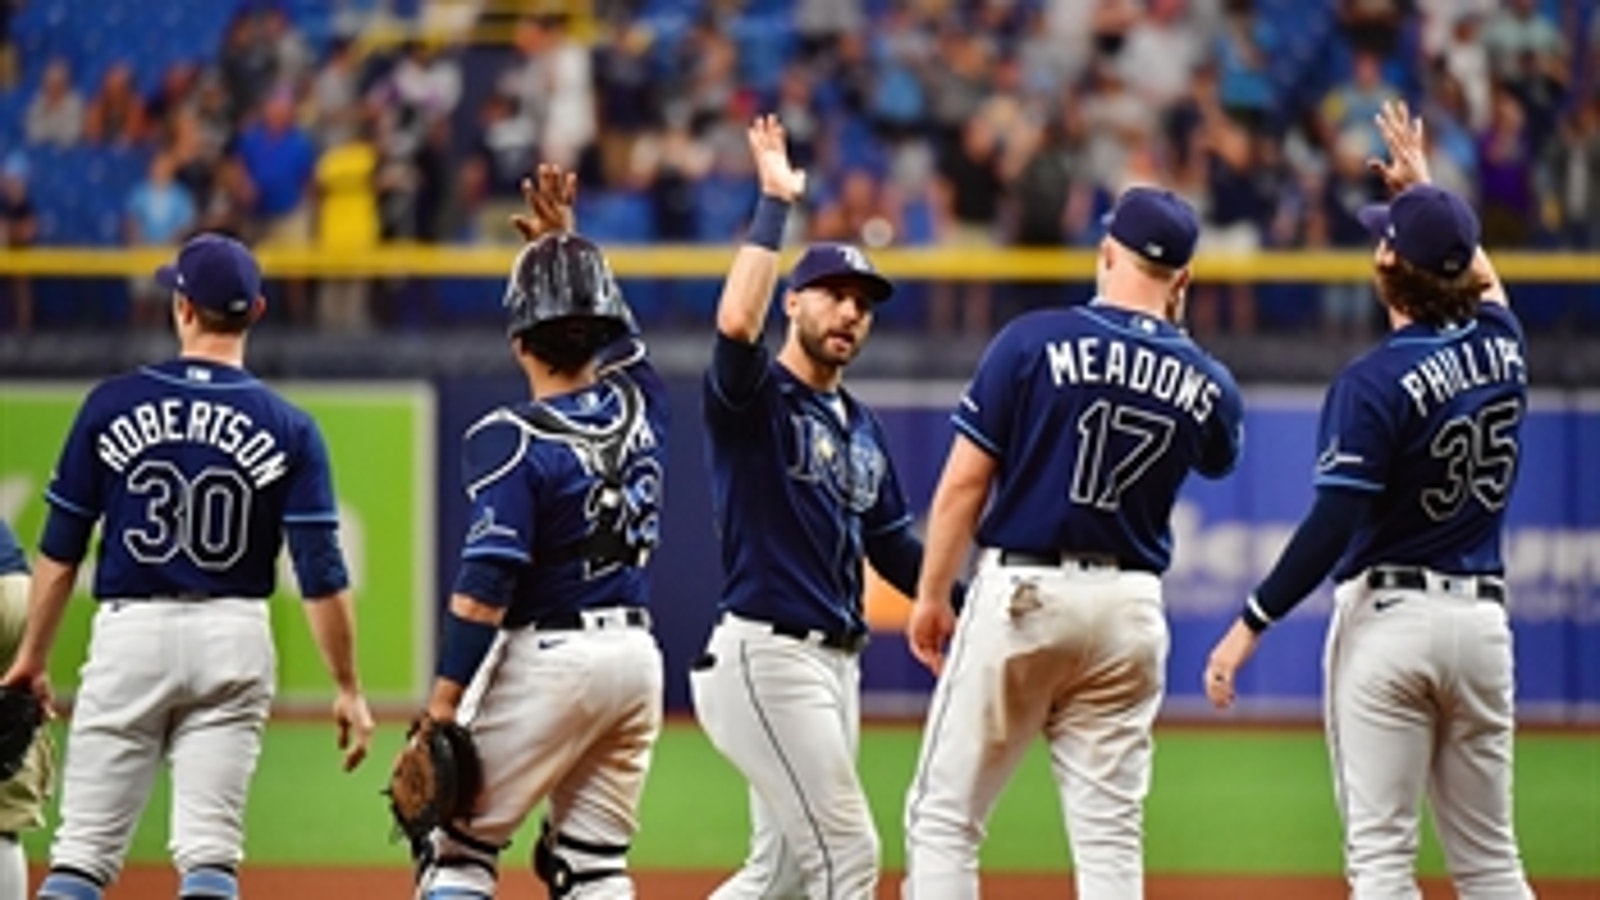 "The Rays' offense is pretty scary!" - Jake and Jordan on Tampa Bay's postseason chances